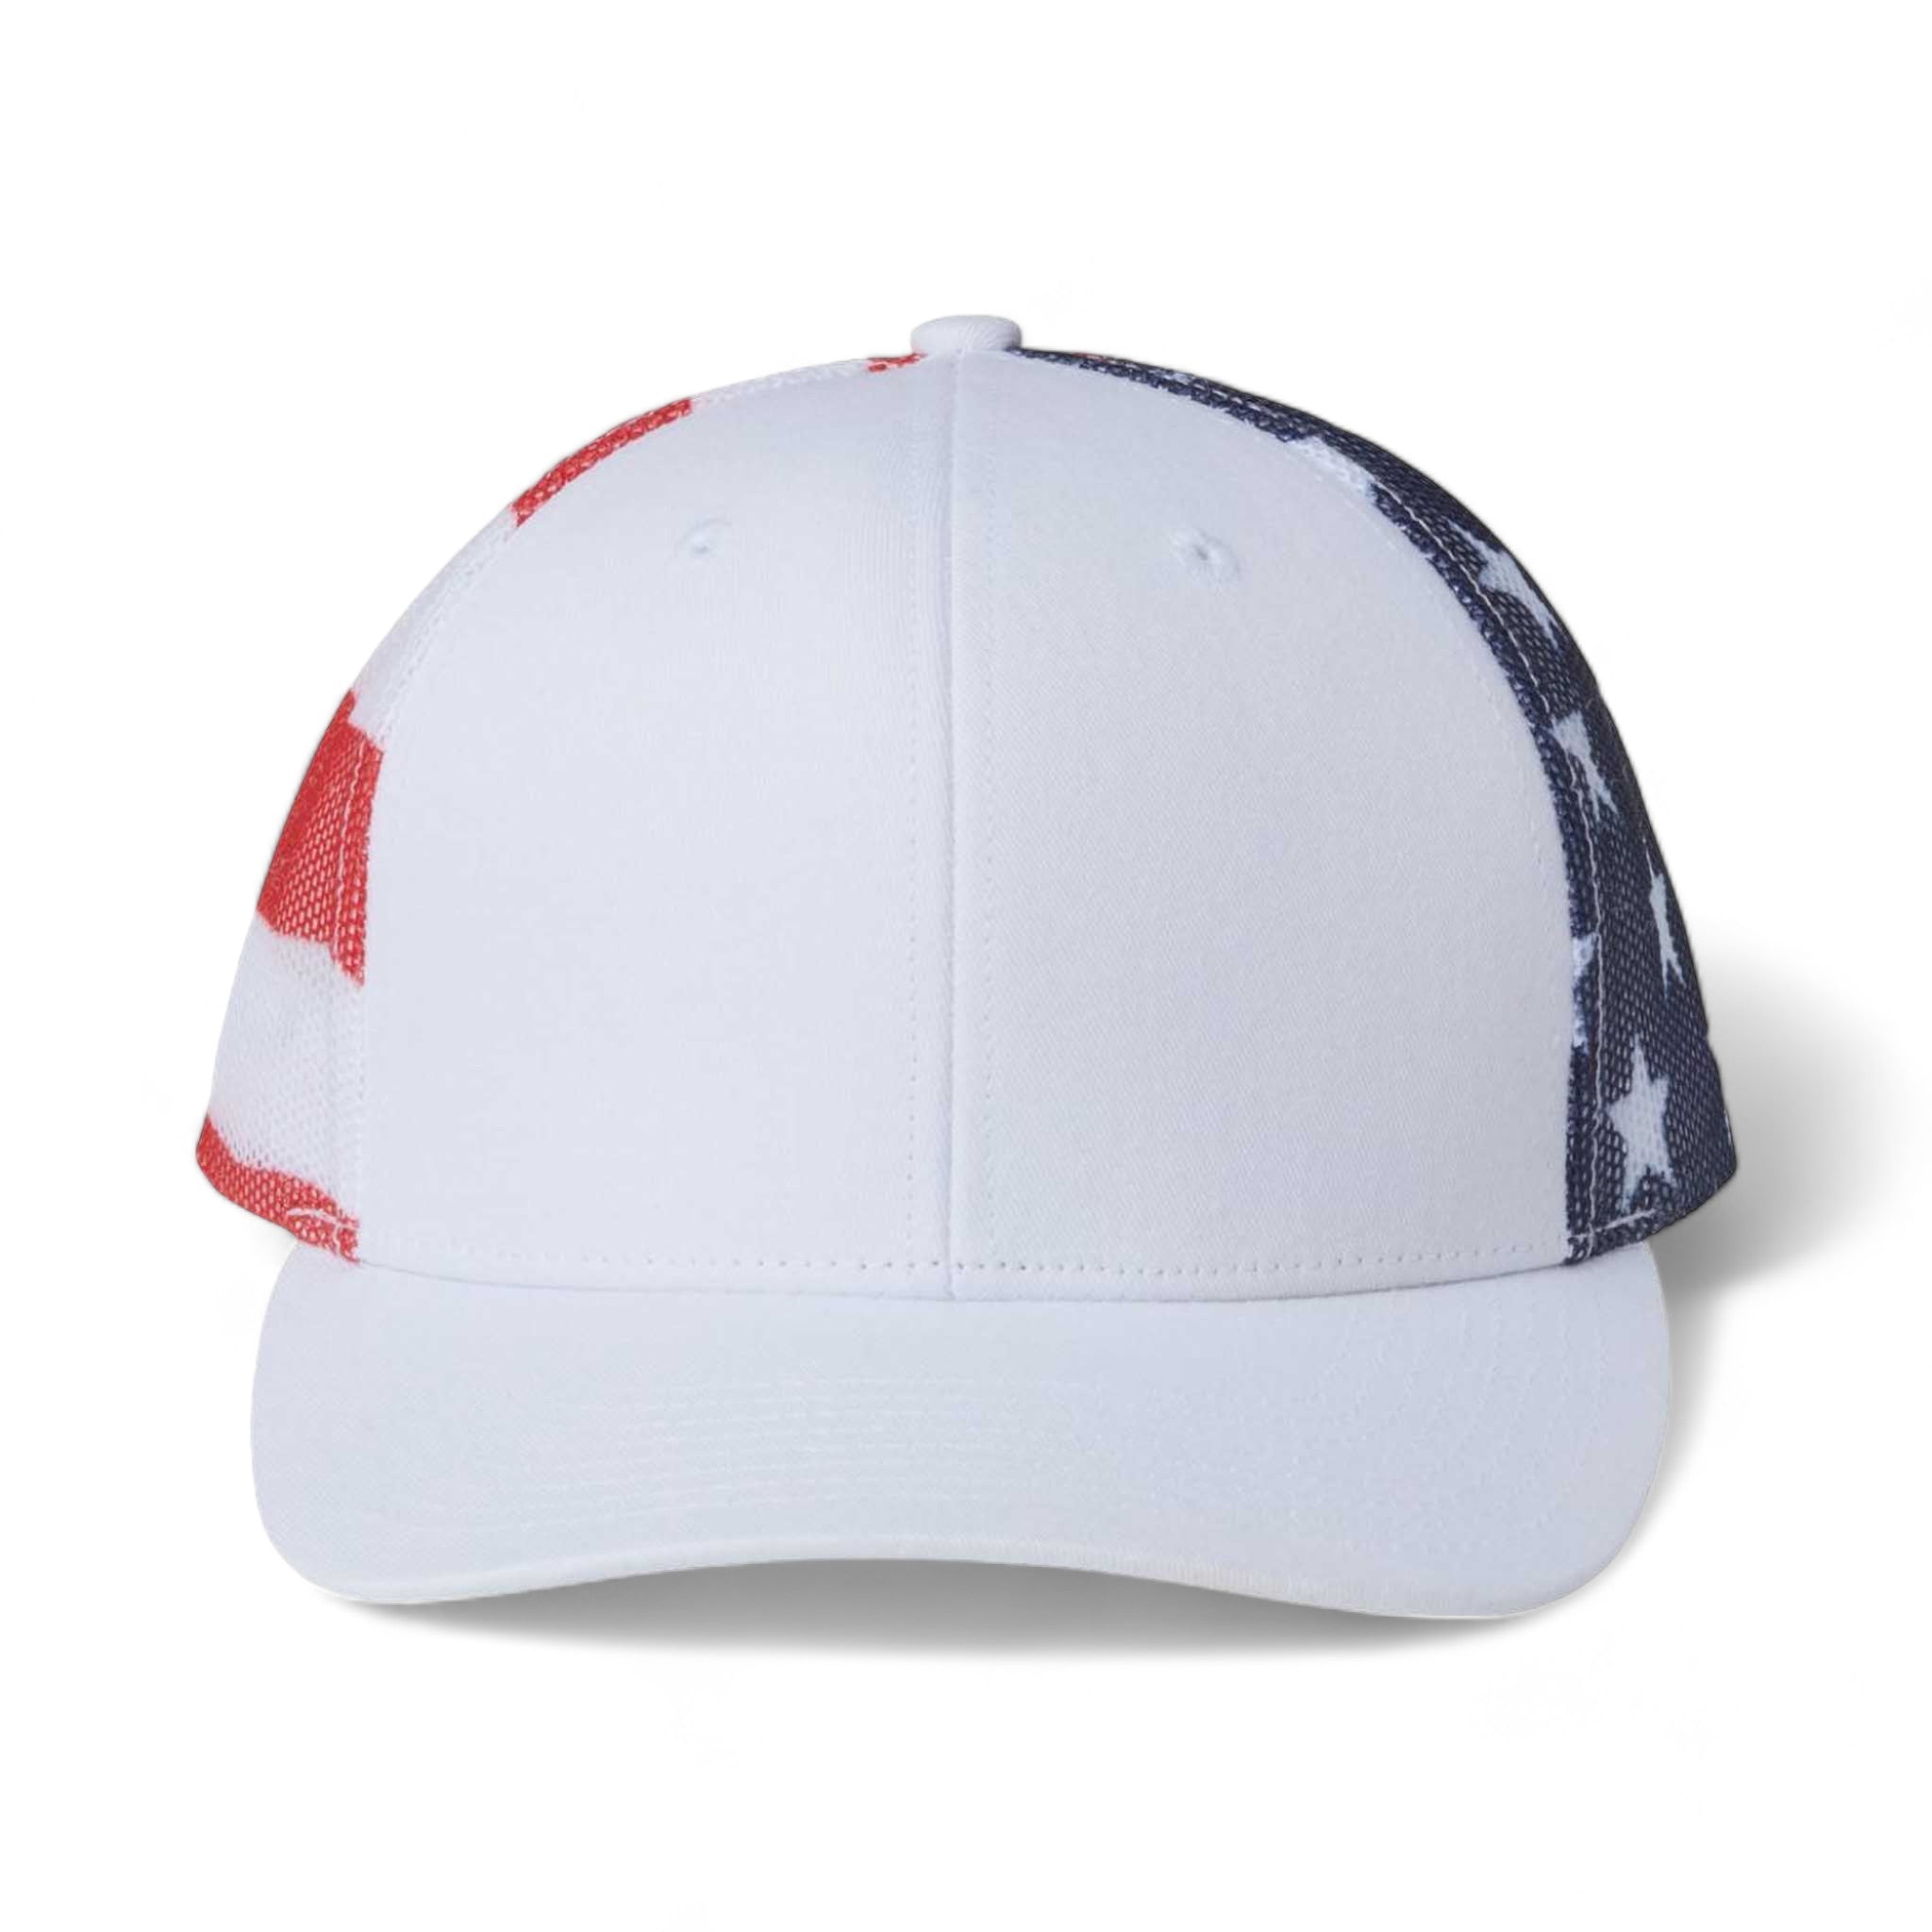 Front view of Kati S700M custom hat in white and usa flag